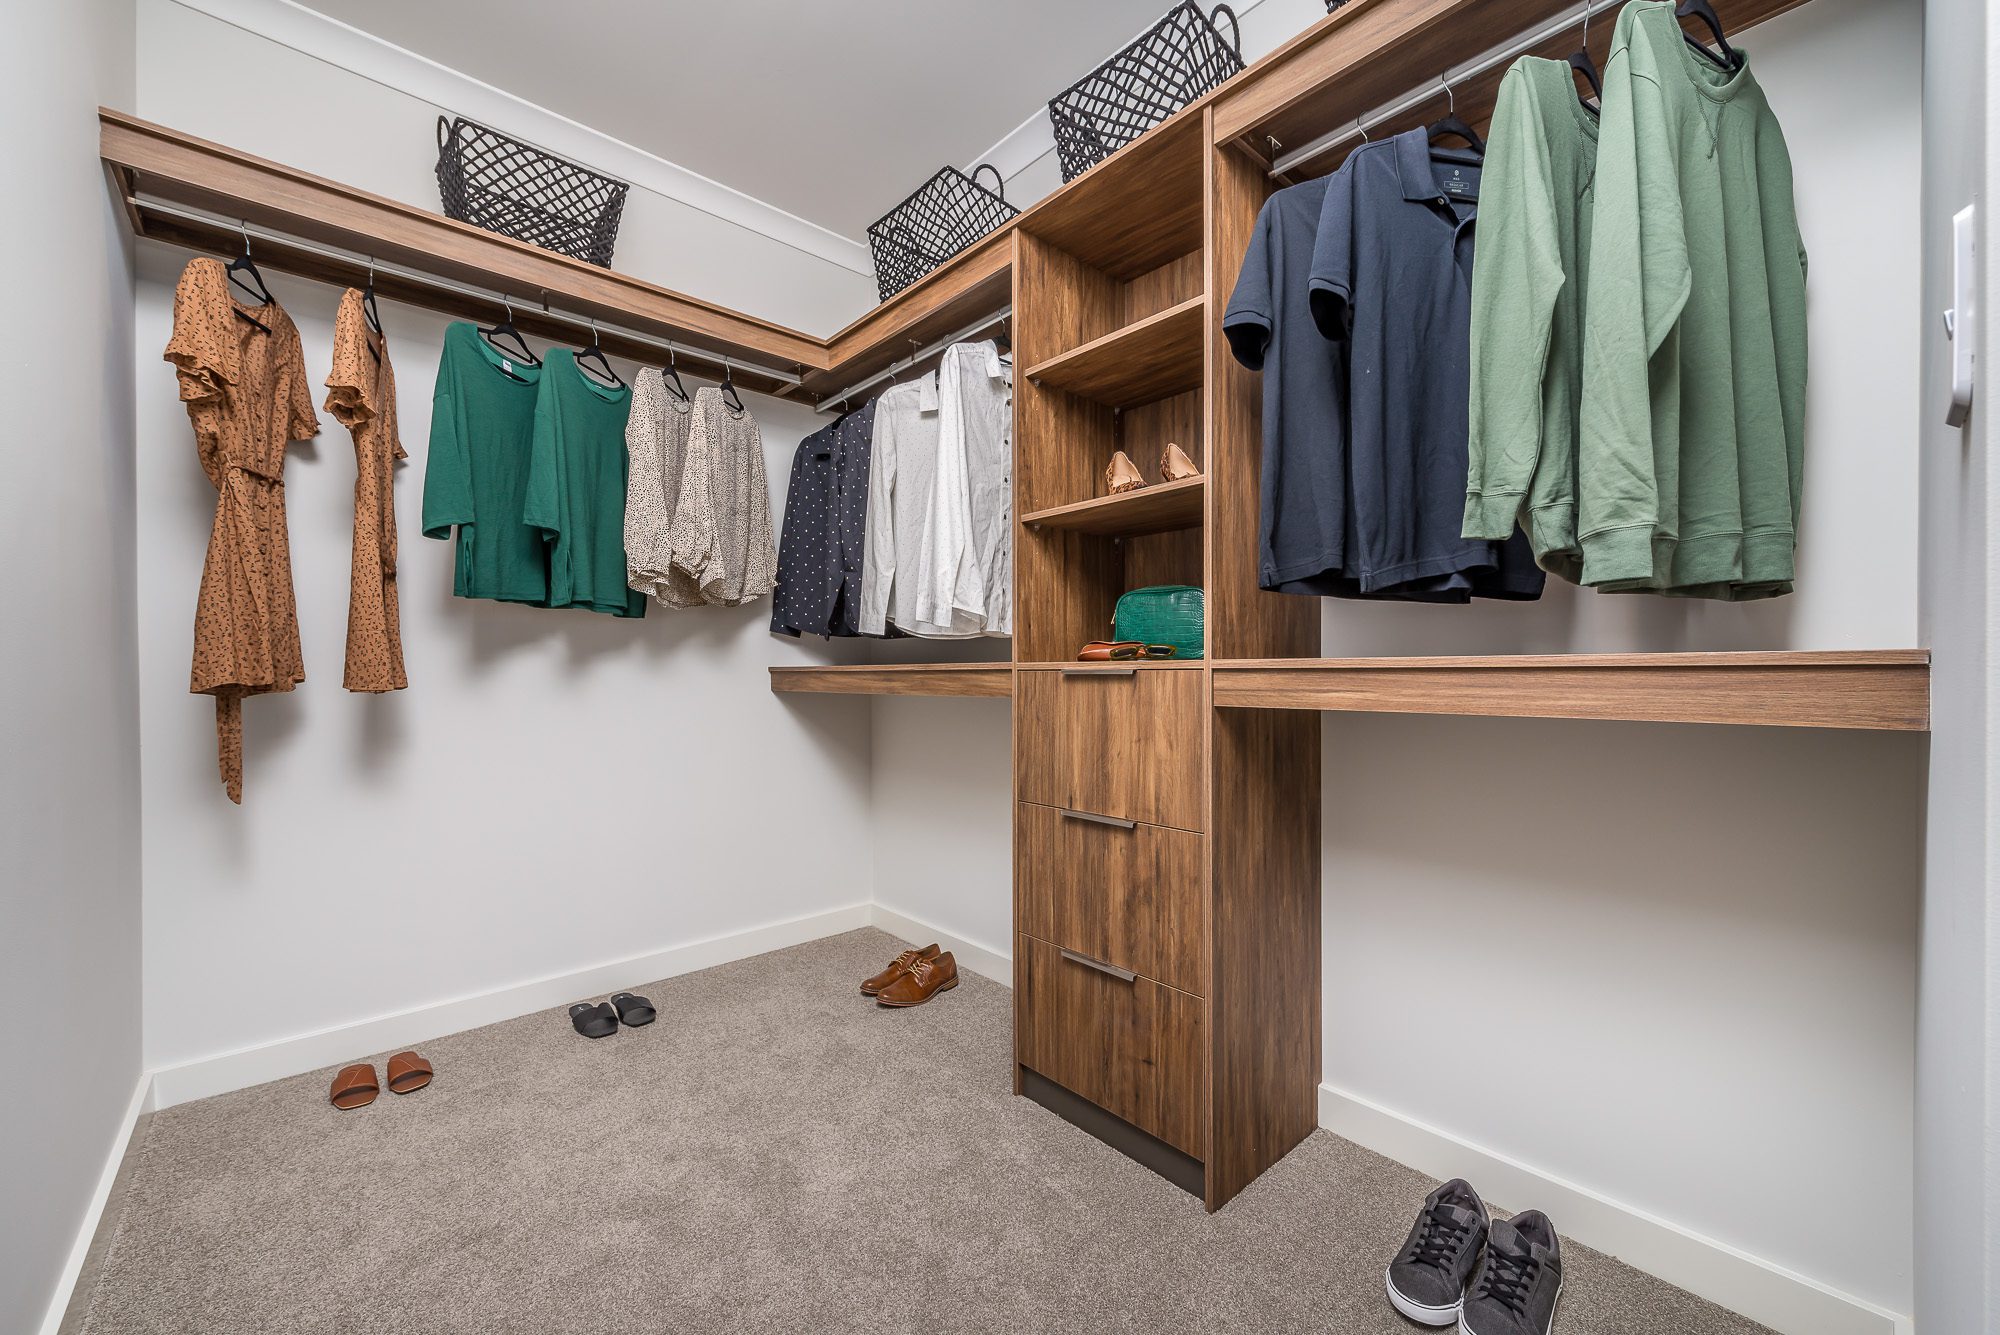 Services_Wardrobes_New Choice Homes_The Kingston_Treeby_06 - 74 Sapphire Dr.jpg.crdownload